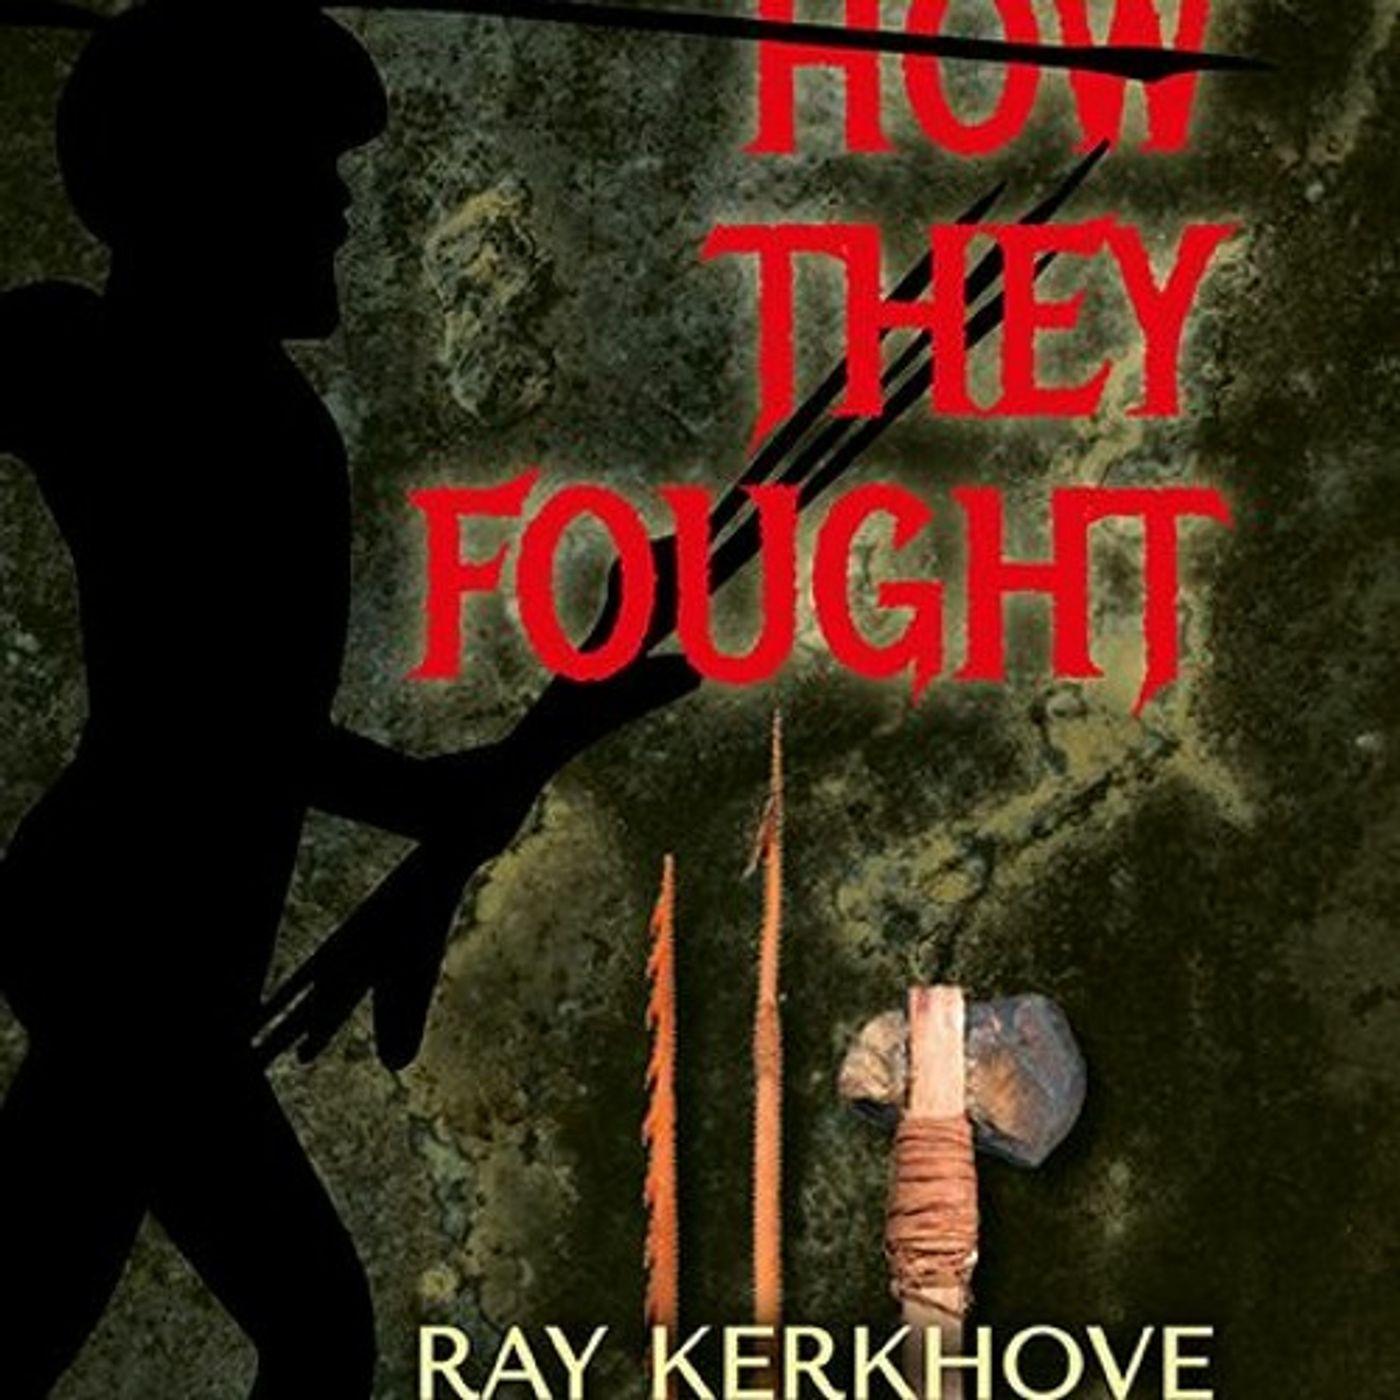 Dan Crouch catches up with Dr Ray Kerkhove, Author of How They Fought which explores forgotten successes of Aboriginal resistance